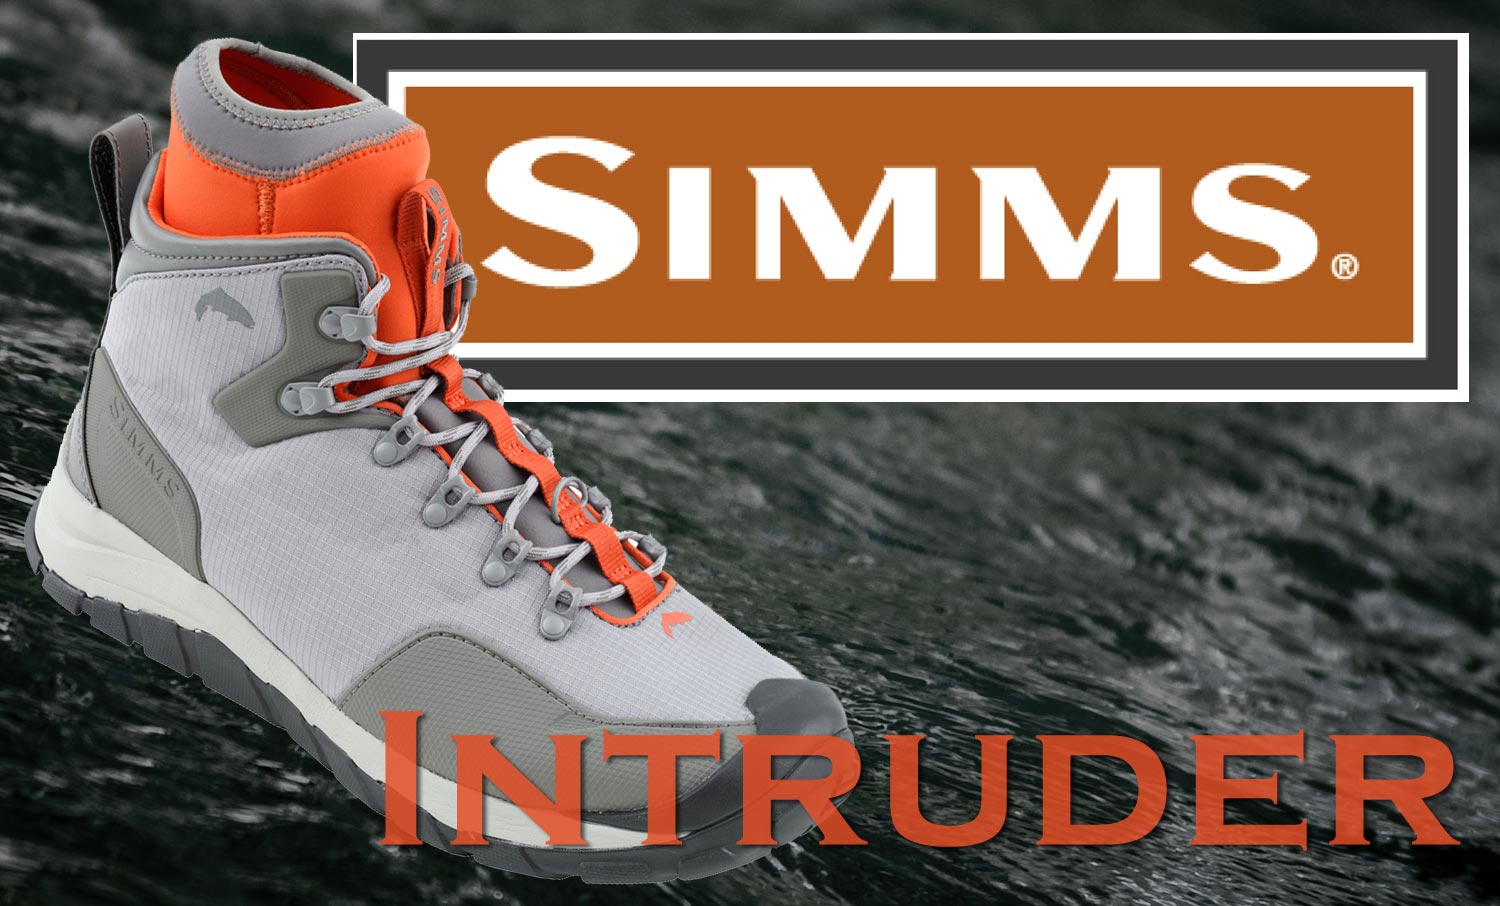 New Wet Wading Boots From Simms - Fly Fishing